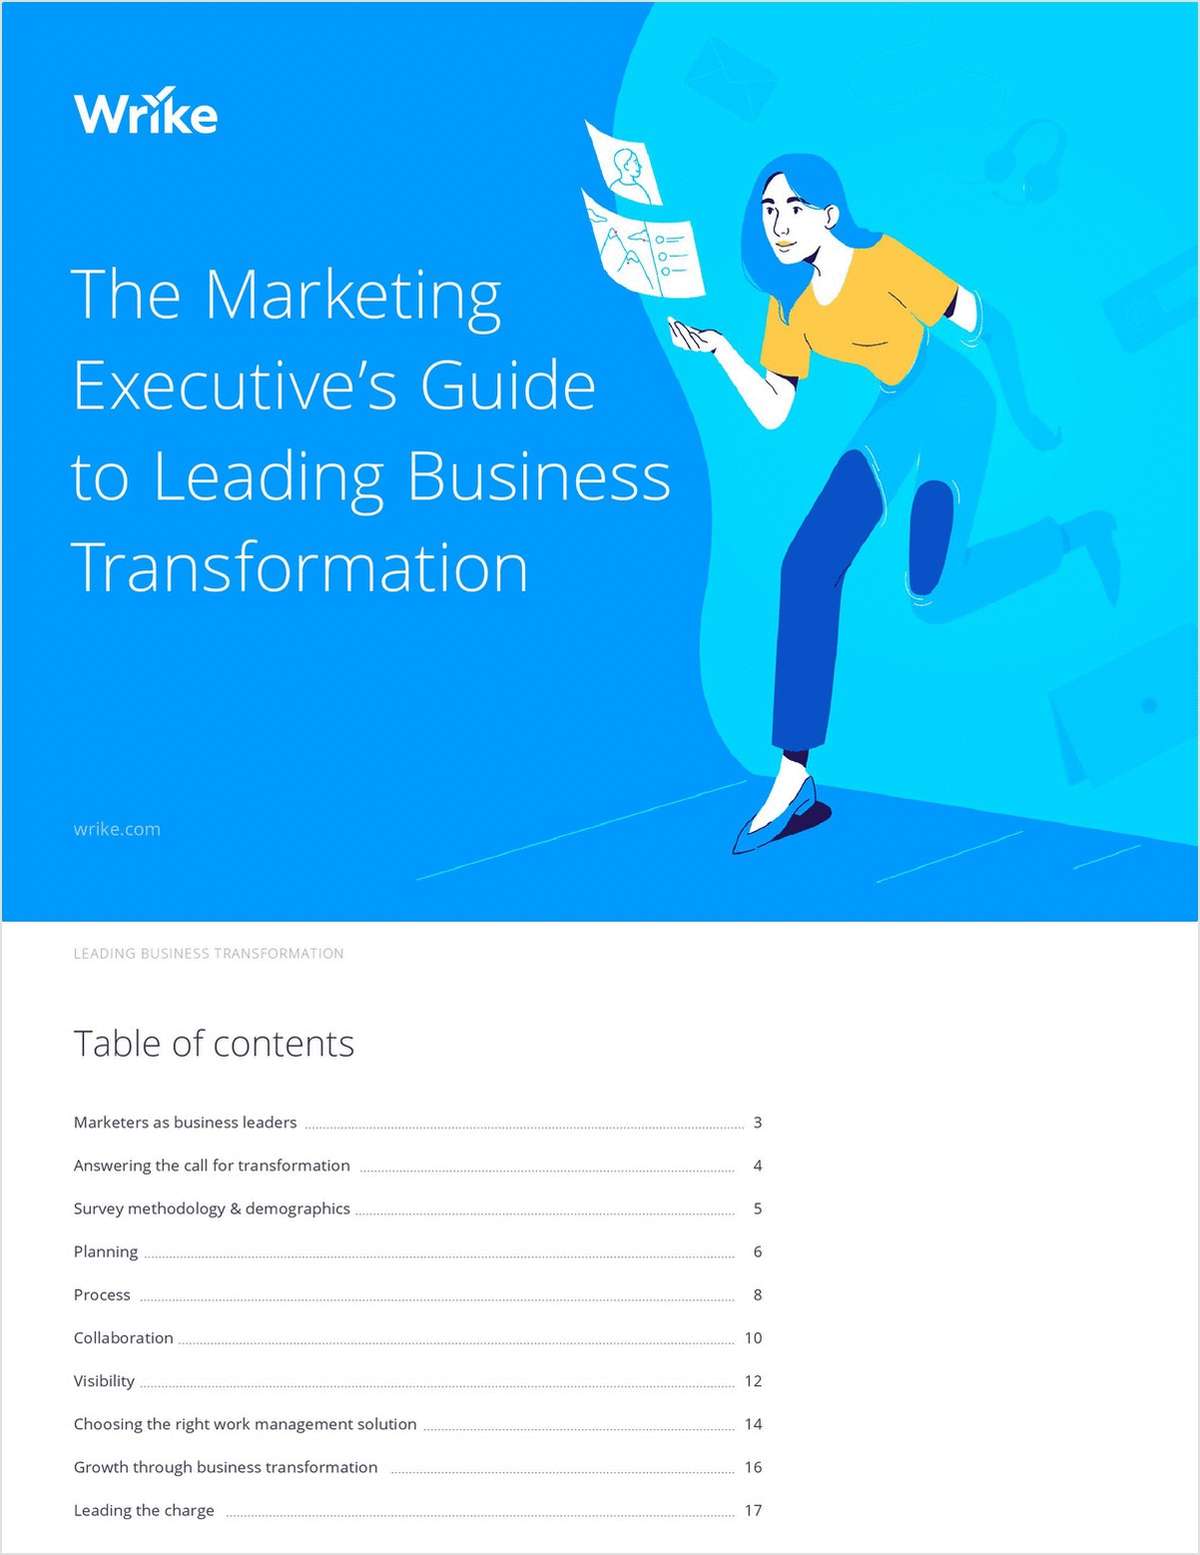 The Marketing Executive's Guide to Leading Business Transformation